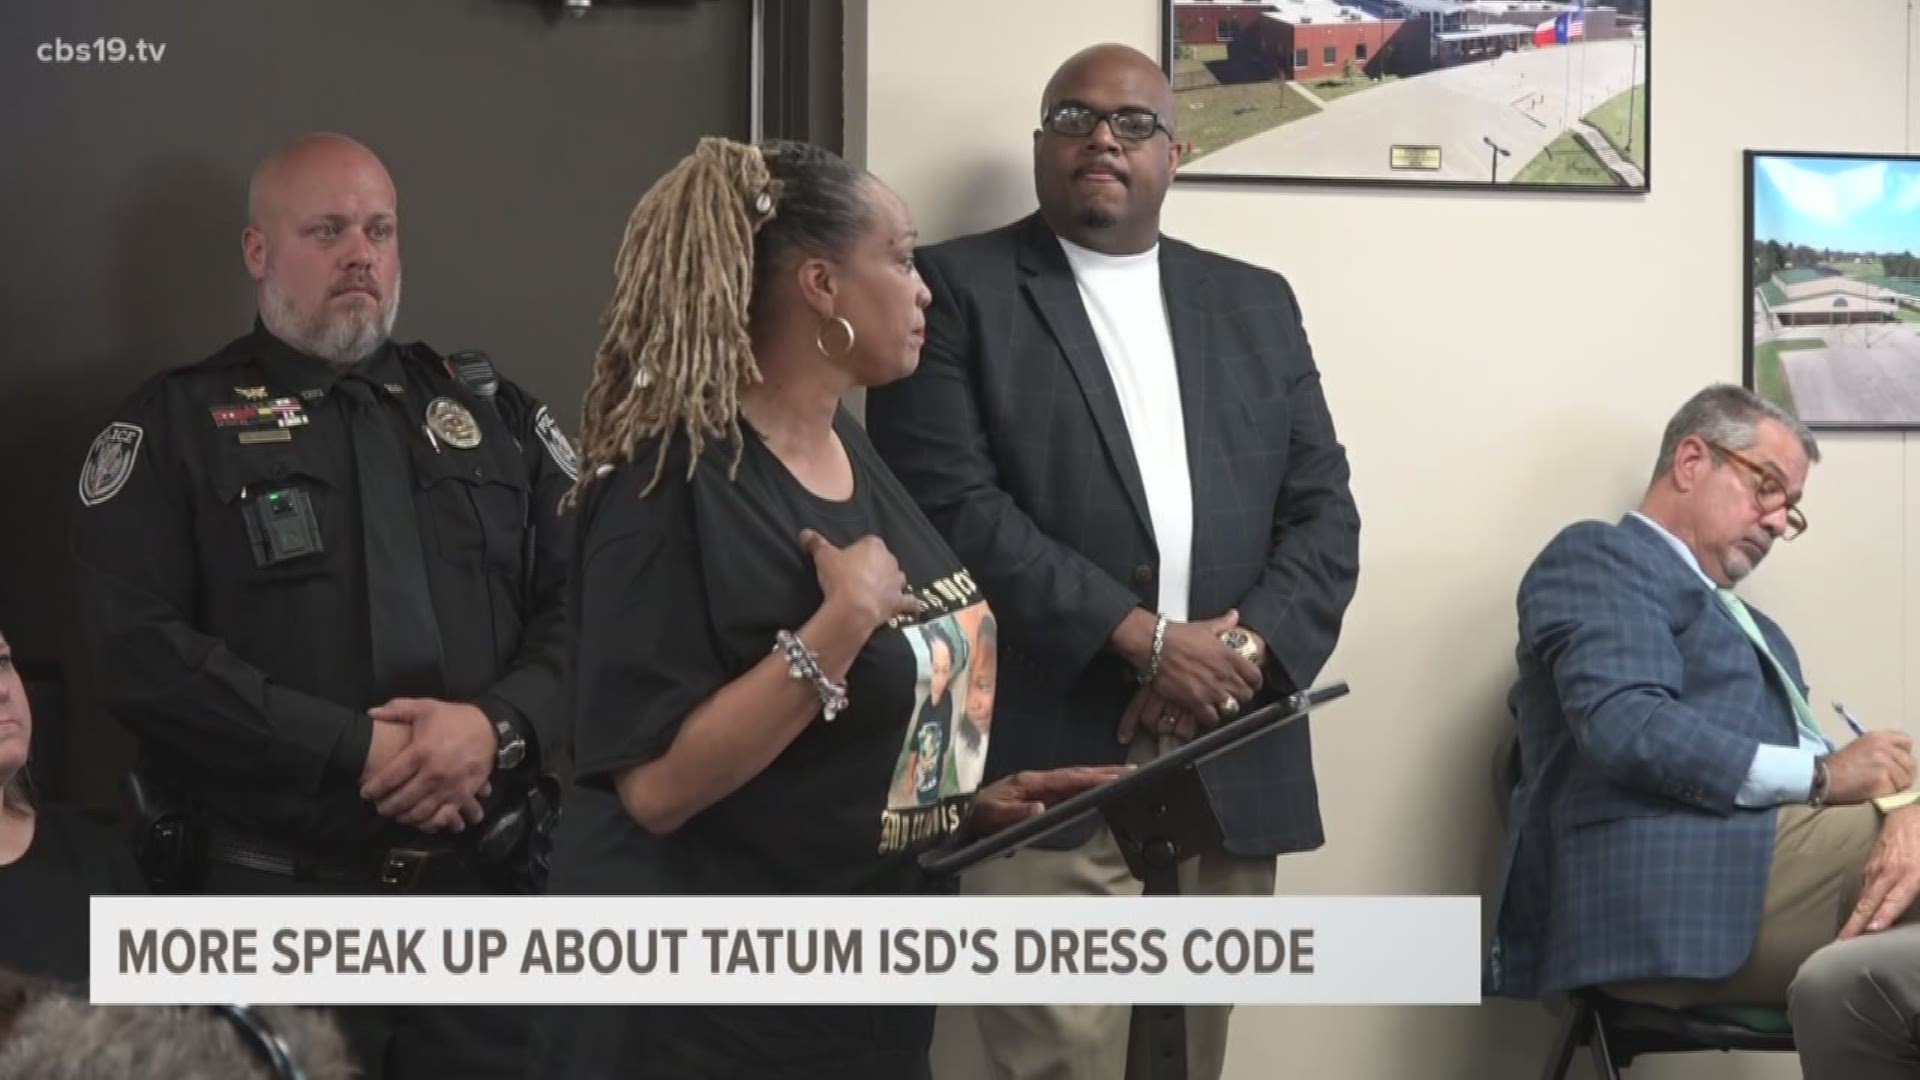 More speak up about Tatum ISD's dress code policy